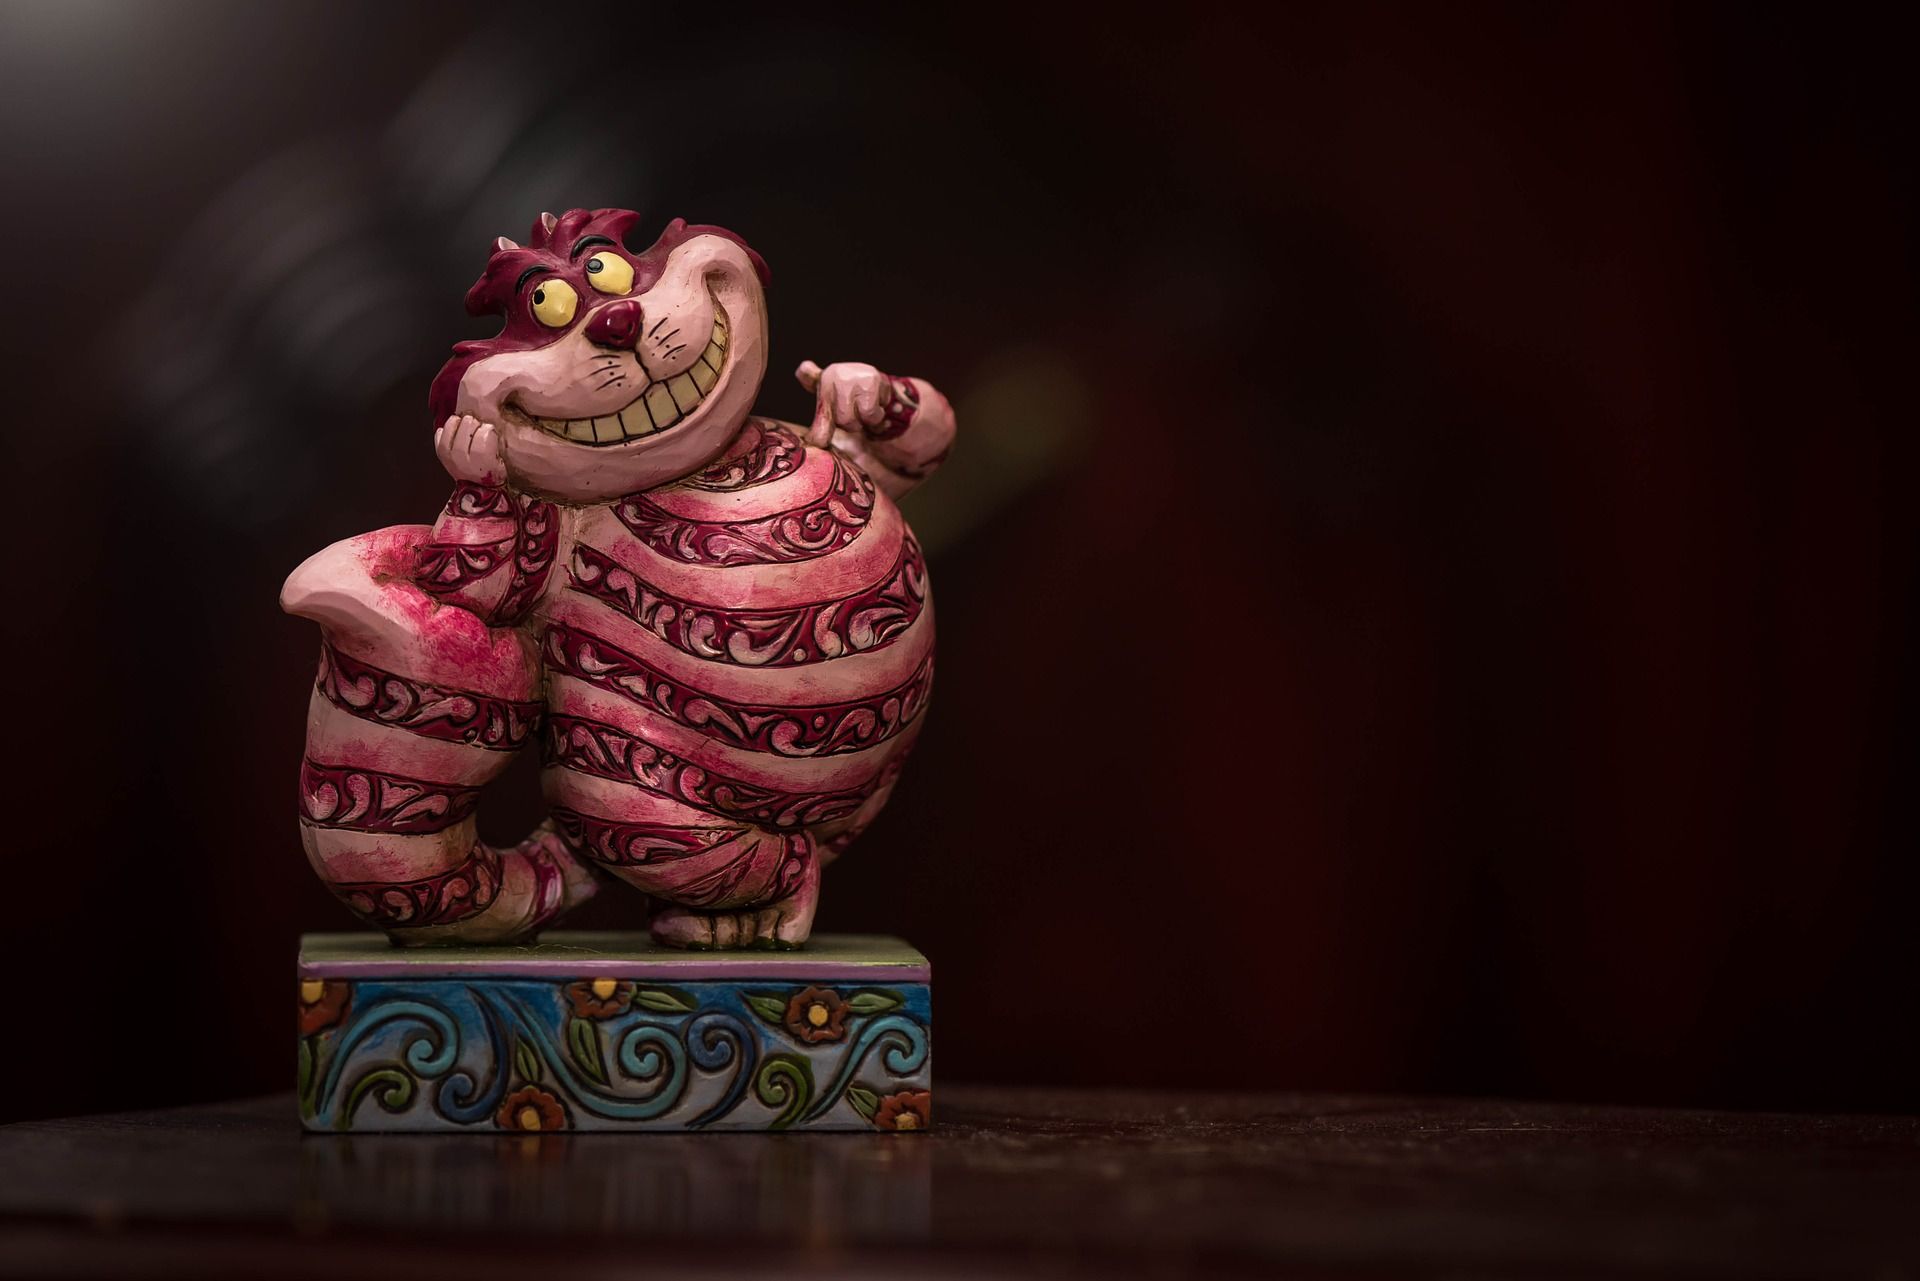 Cheshire Cat from Lewis Carroll's Alice's Adventures in Wonderland